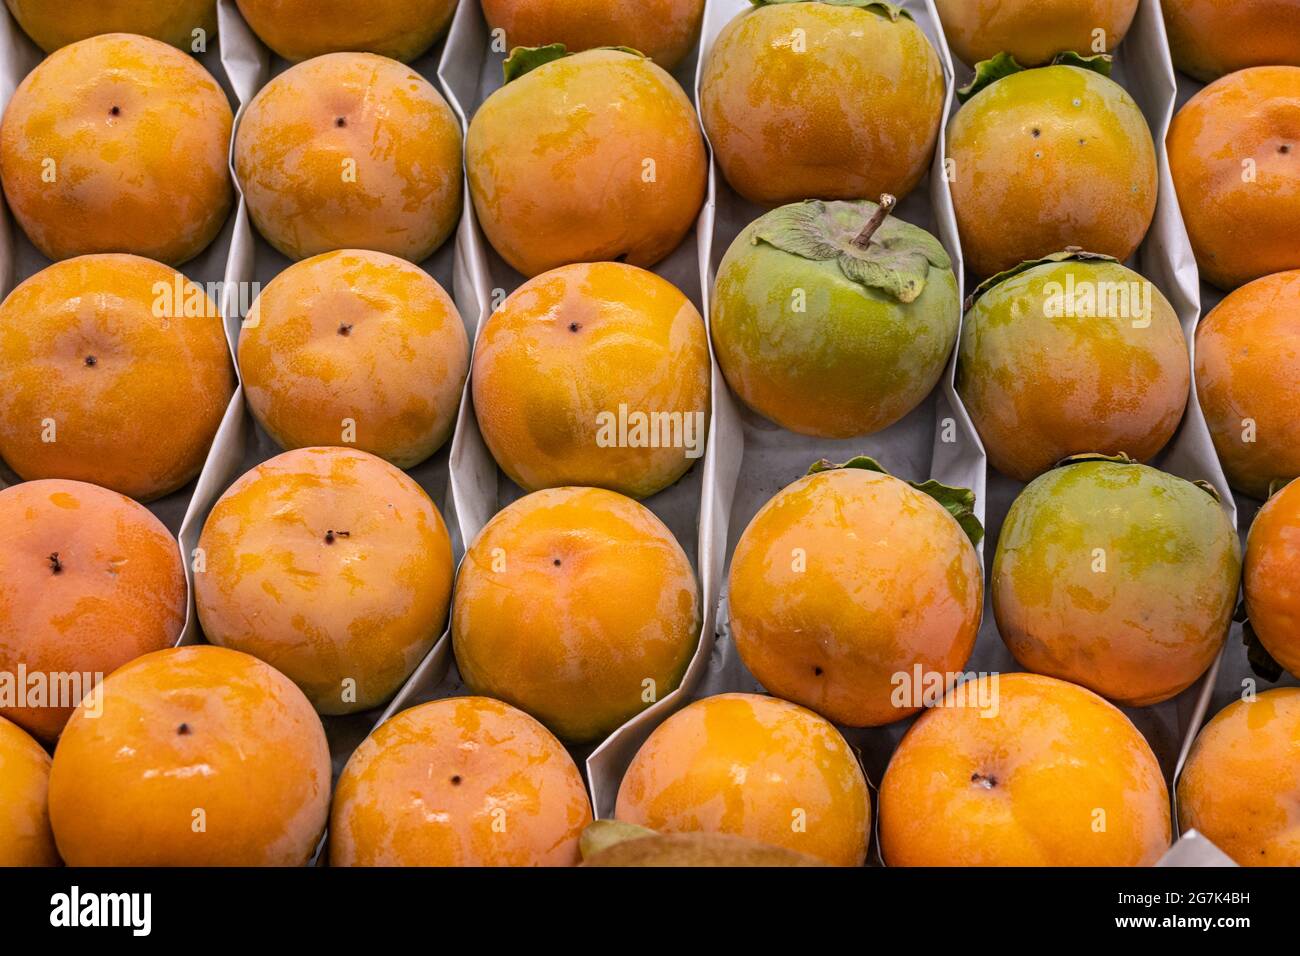 Fresh persimmon, a tray of ripe juicy persimmons close-up at the farmer's market Stock Photo